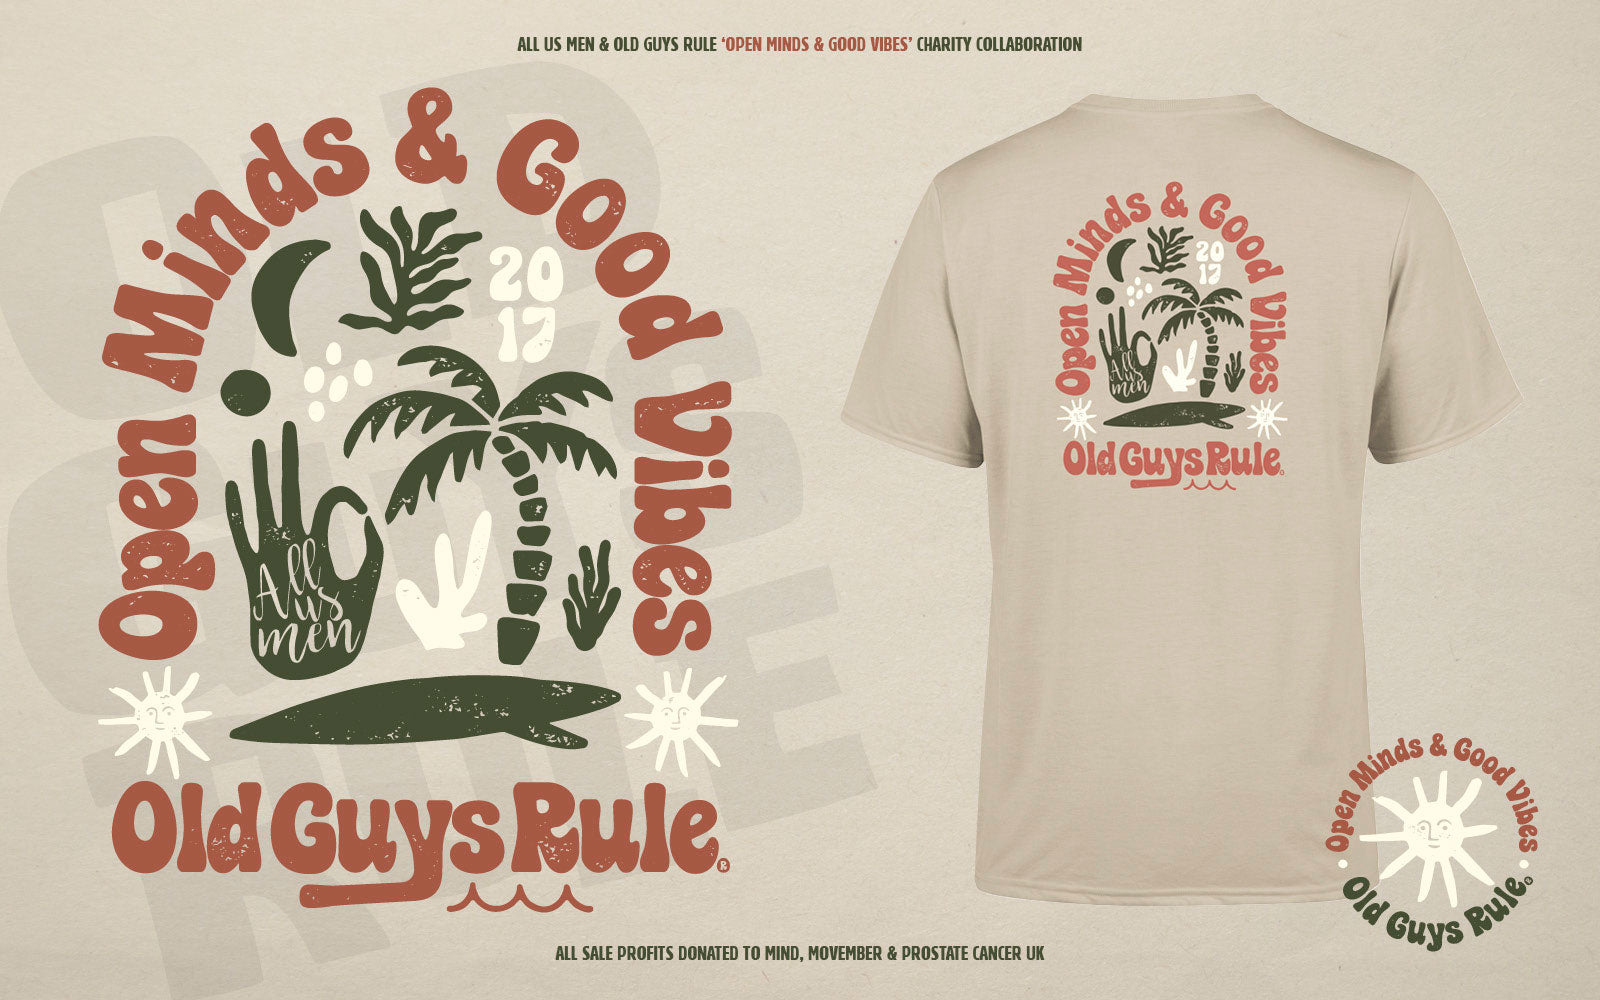 Old Guys Rule Men's Open Minds & Good Vibes T-Shirt, Movember, Prostate Cancer UK, MIND, Charity